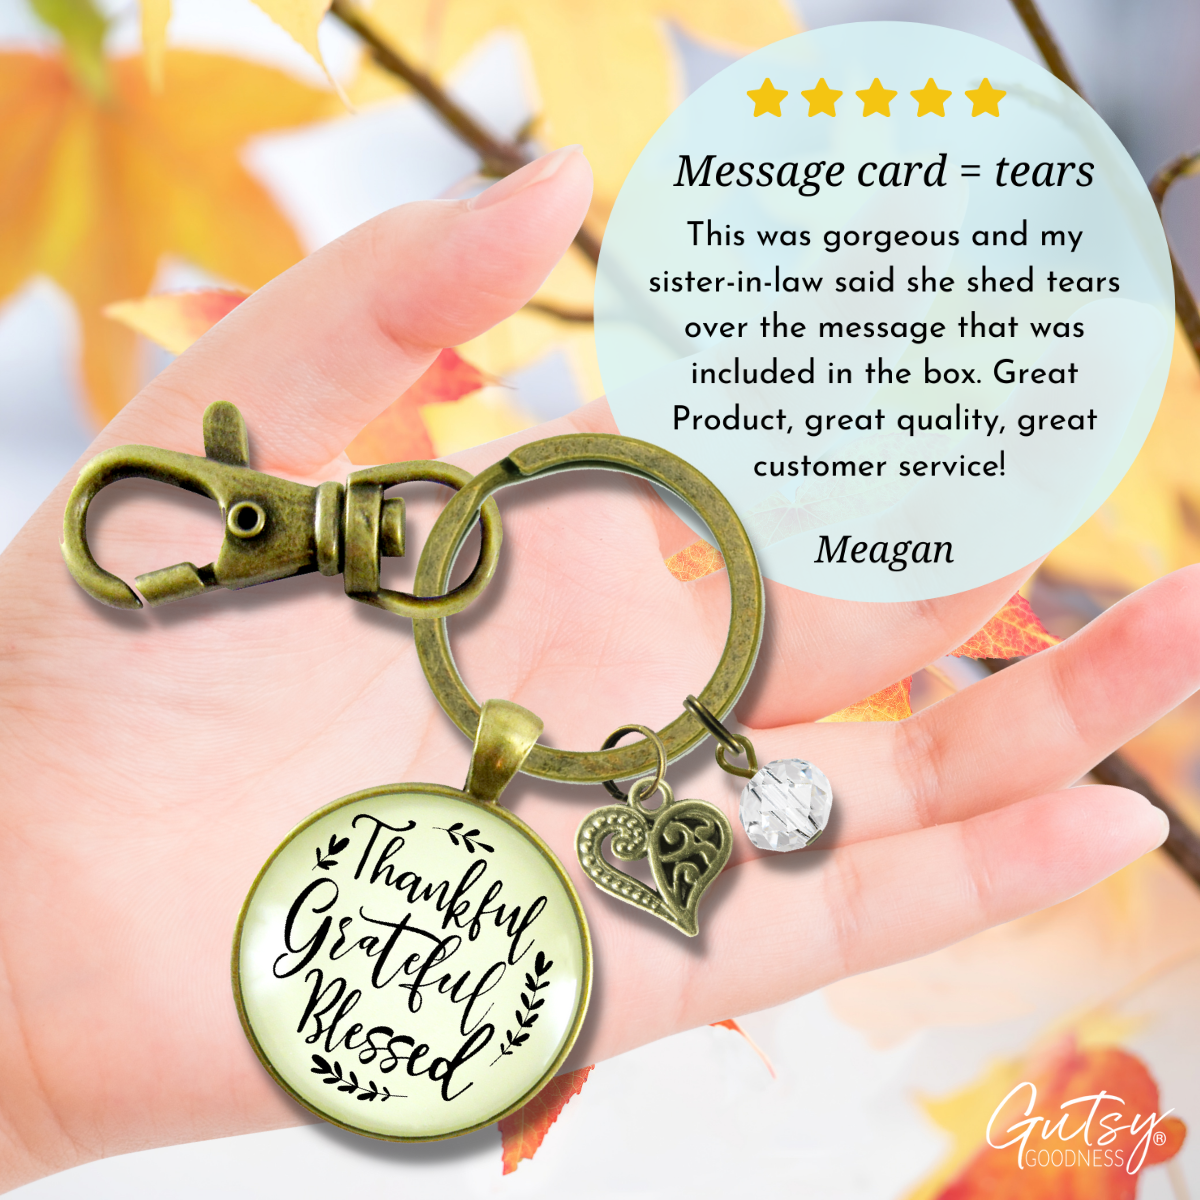 Thankful Grateful Blessed Keychain Inspirational Quote Jewelry For Women - Gutsy Goodness Handmade Jewelry;Thankful Grateful Blessed Keychain Inspirational Quote Jewelry For Women - Gutsy Goodness Handmade Jewelry Gifts